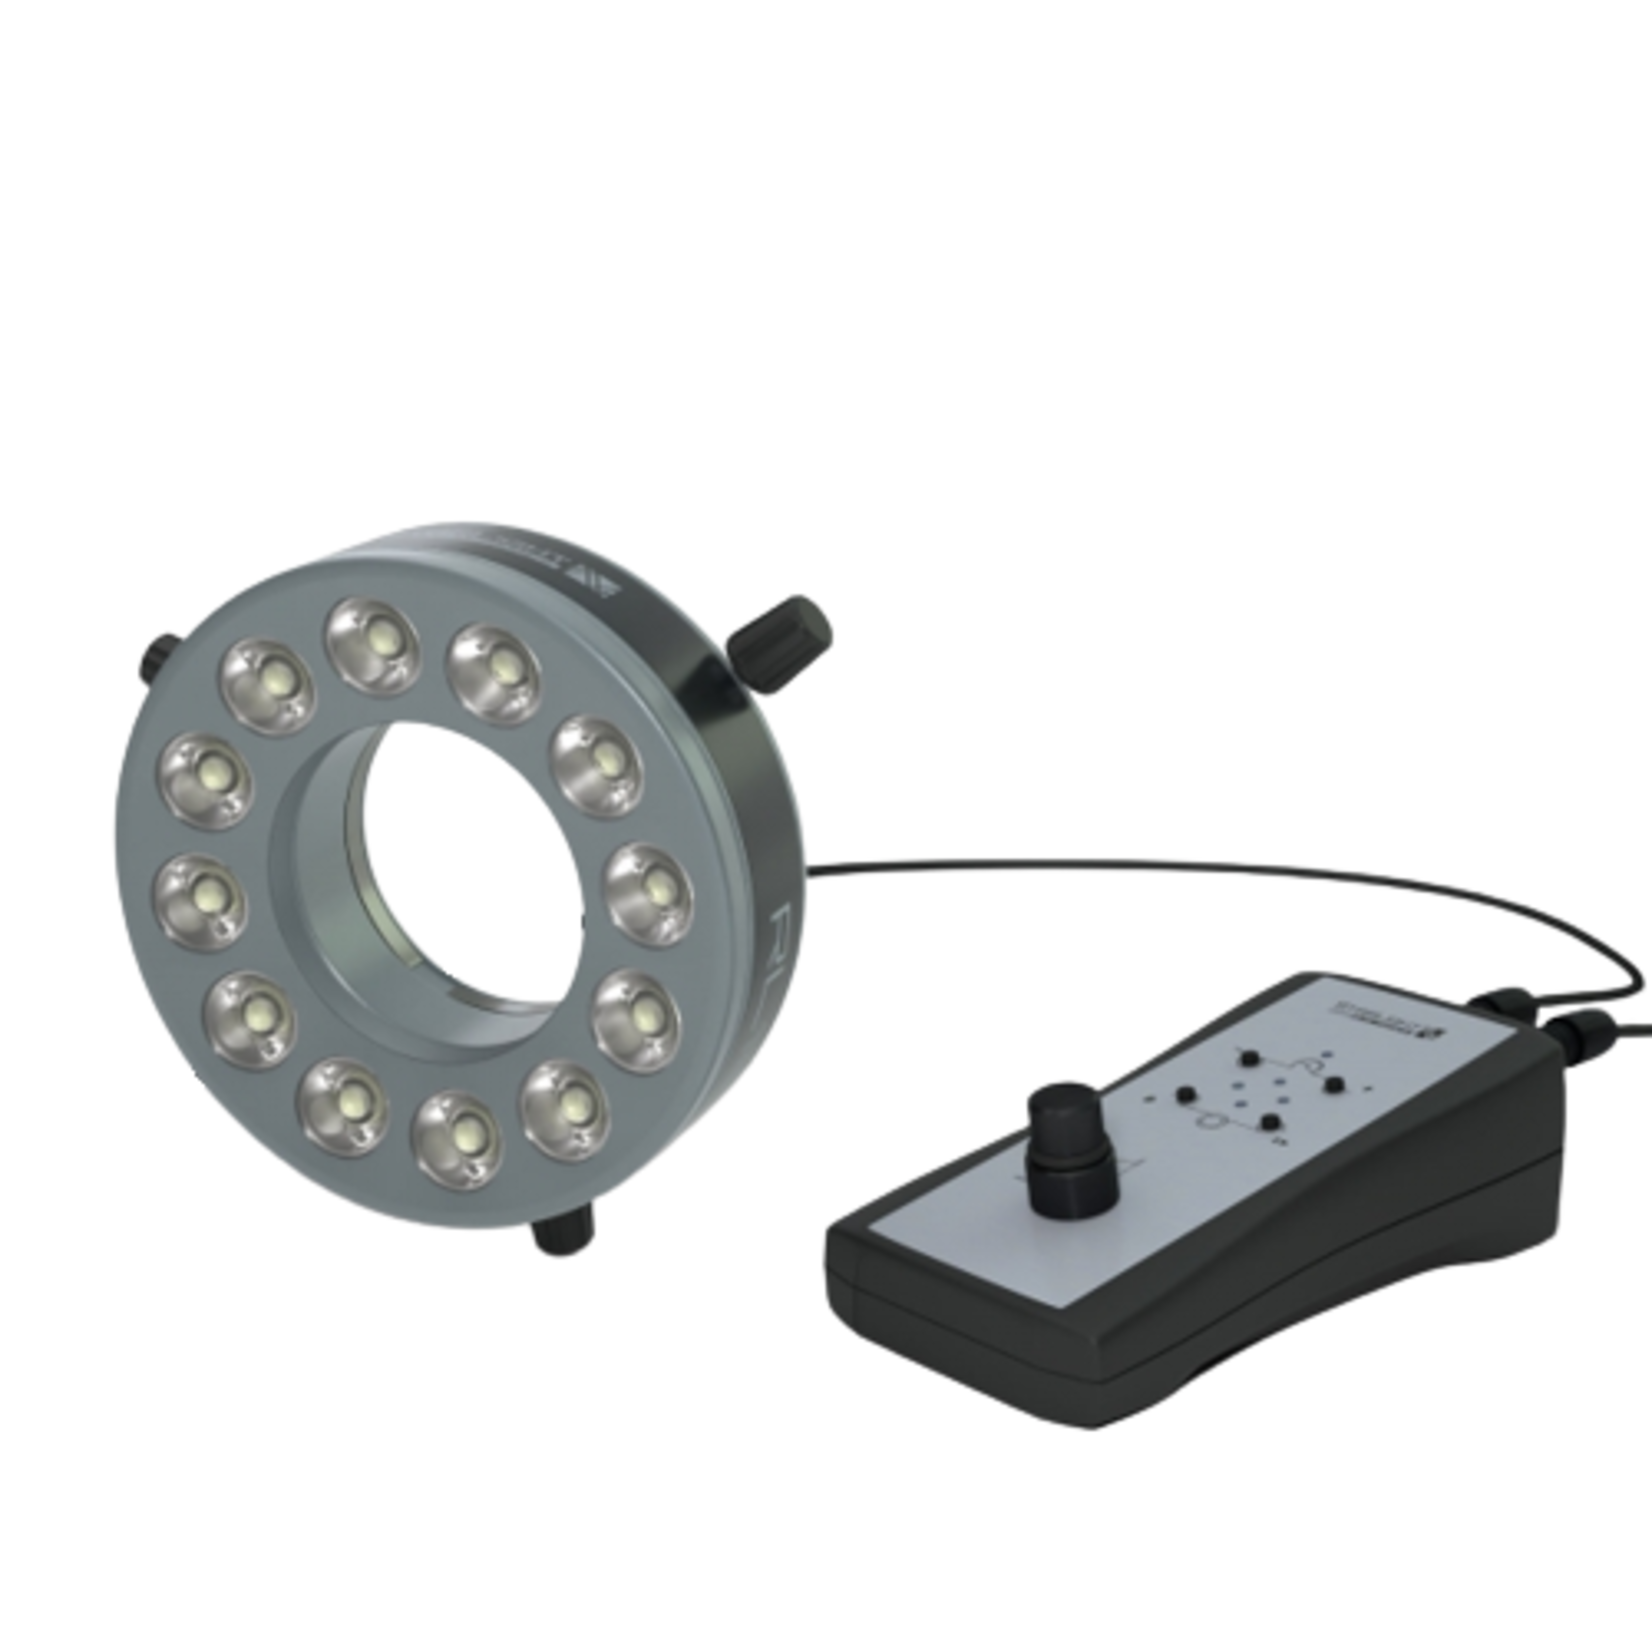 High-brightness segment ring light for working distance 45 mm - 260 mm - optimal approx. 100 mm